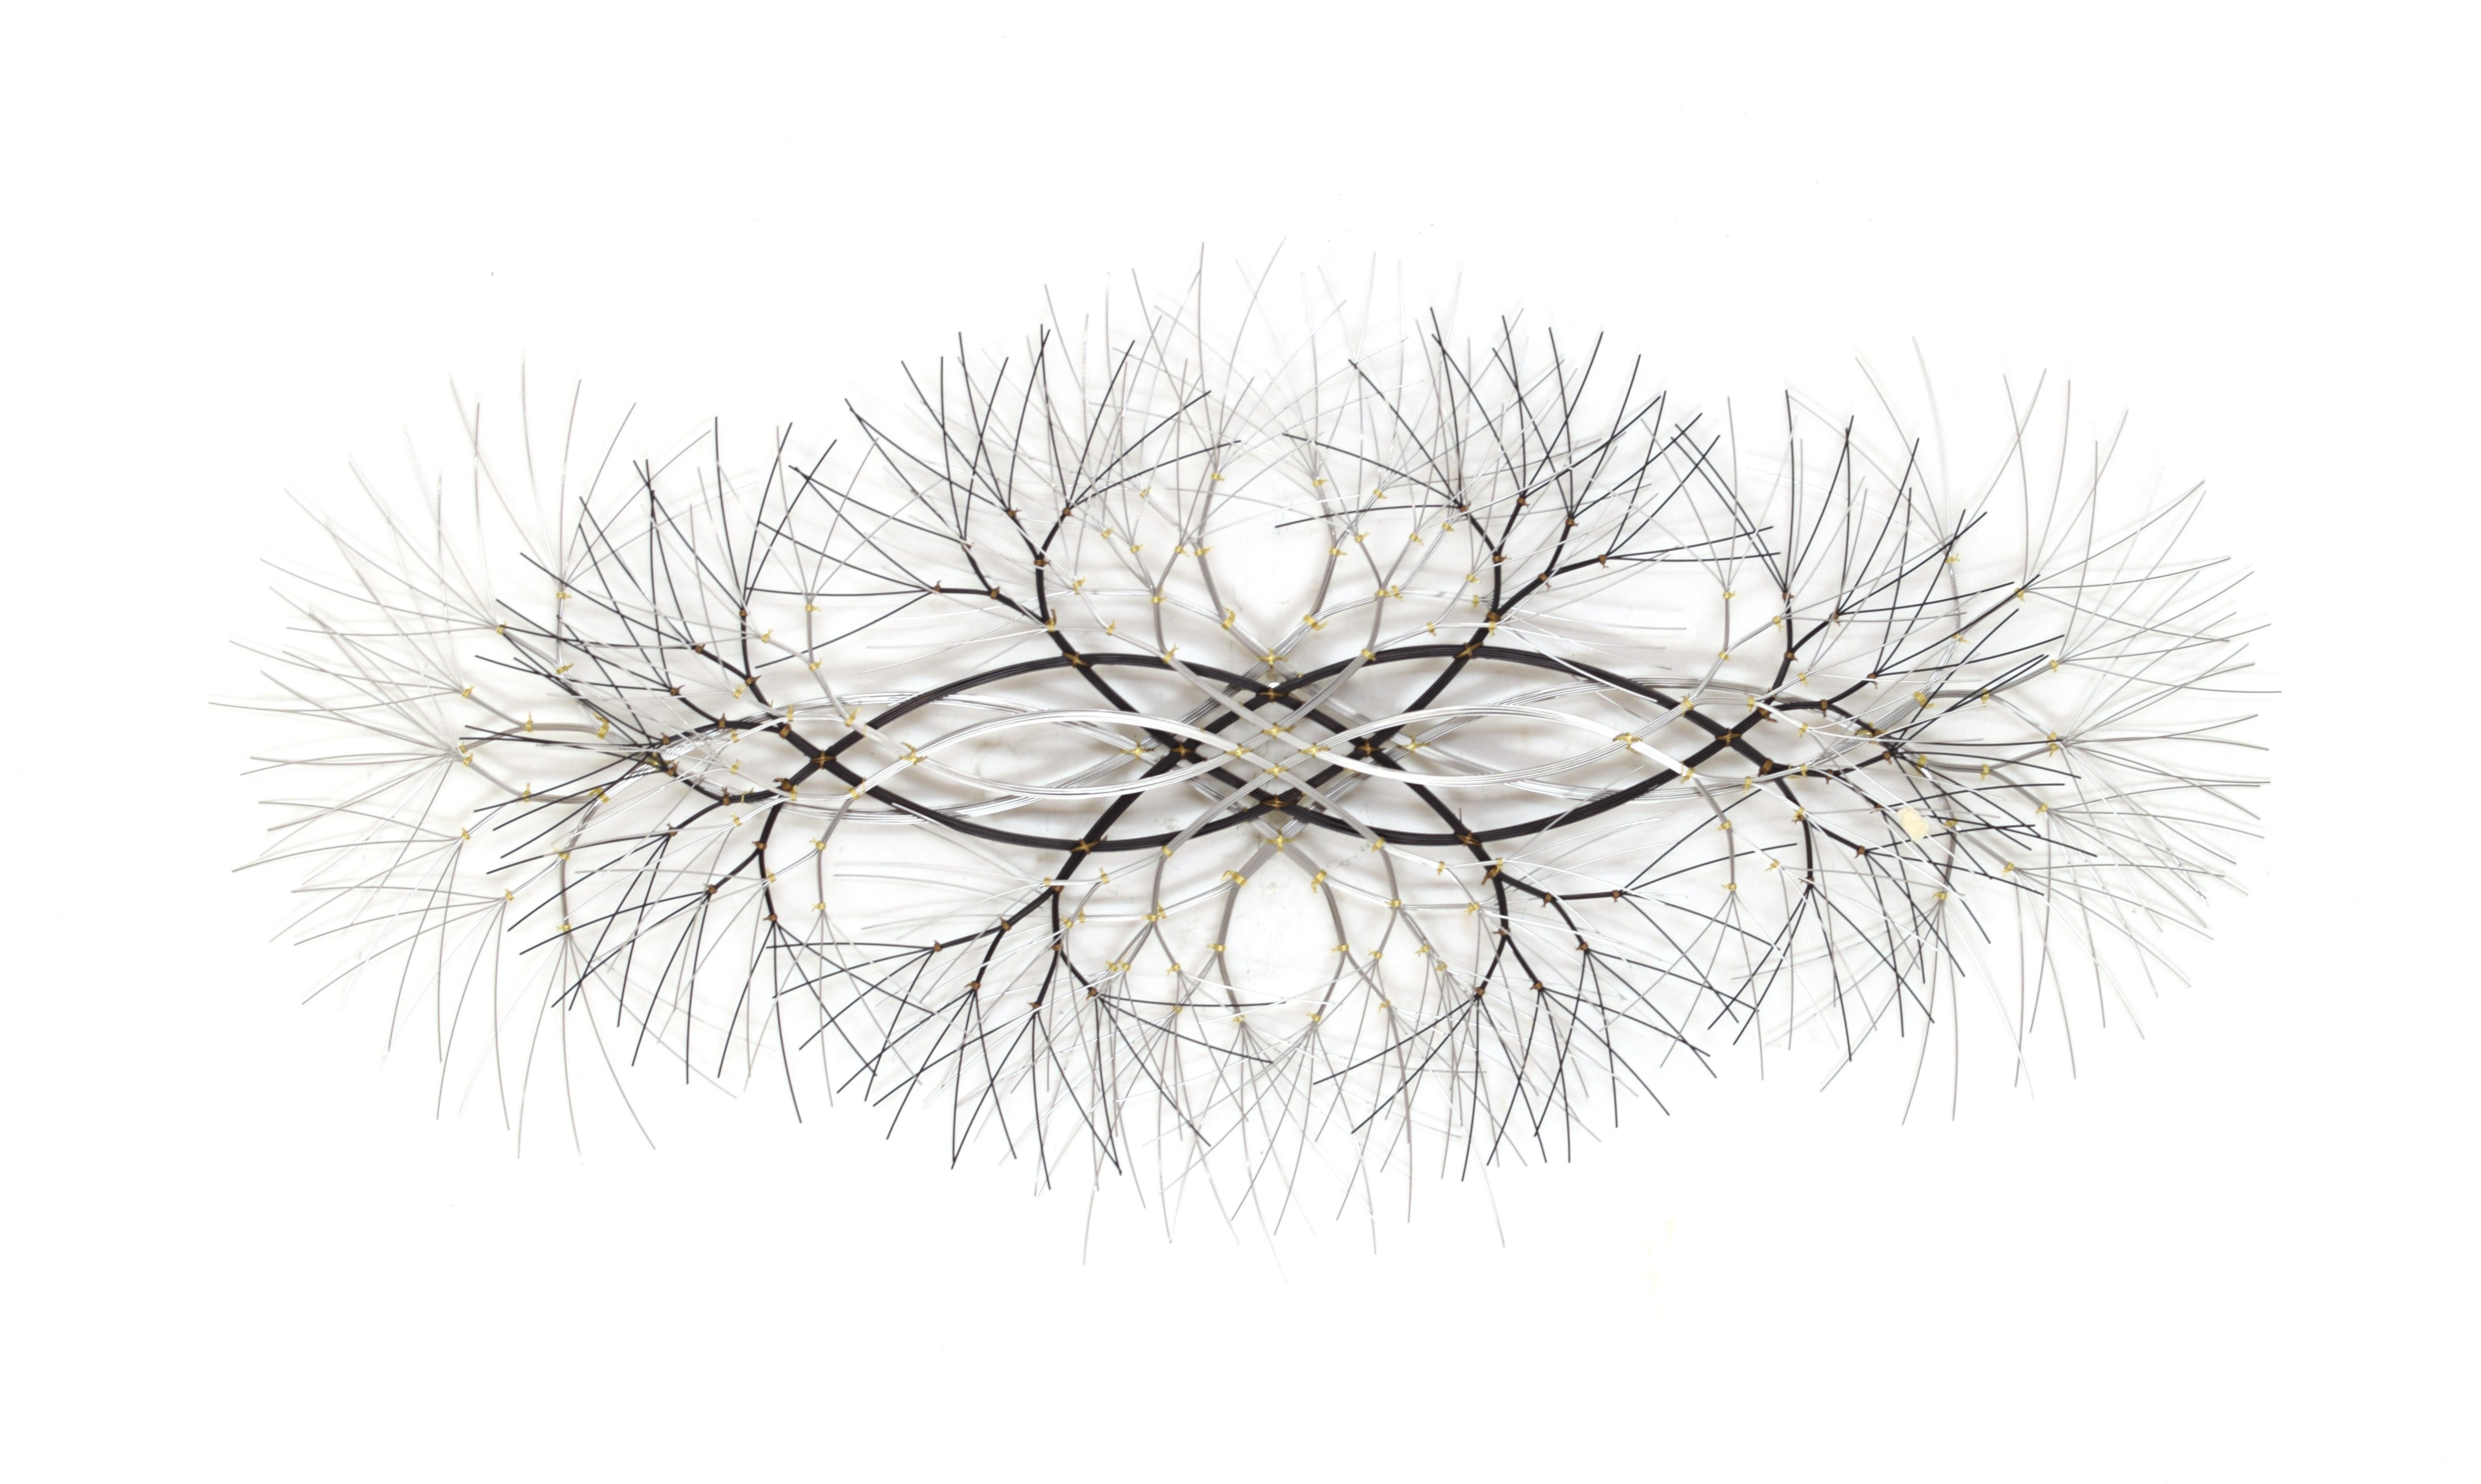 49"x22" Metal Wall Sculpture in Bronze and Stainless, #648